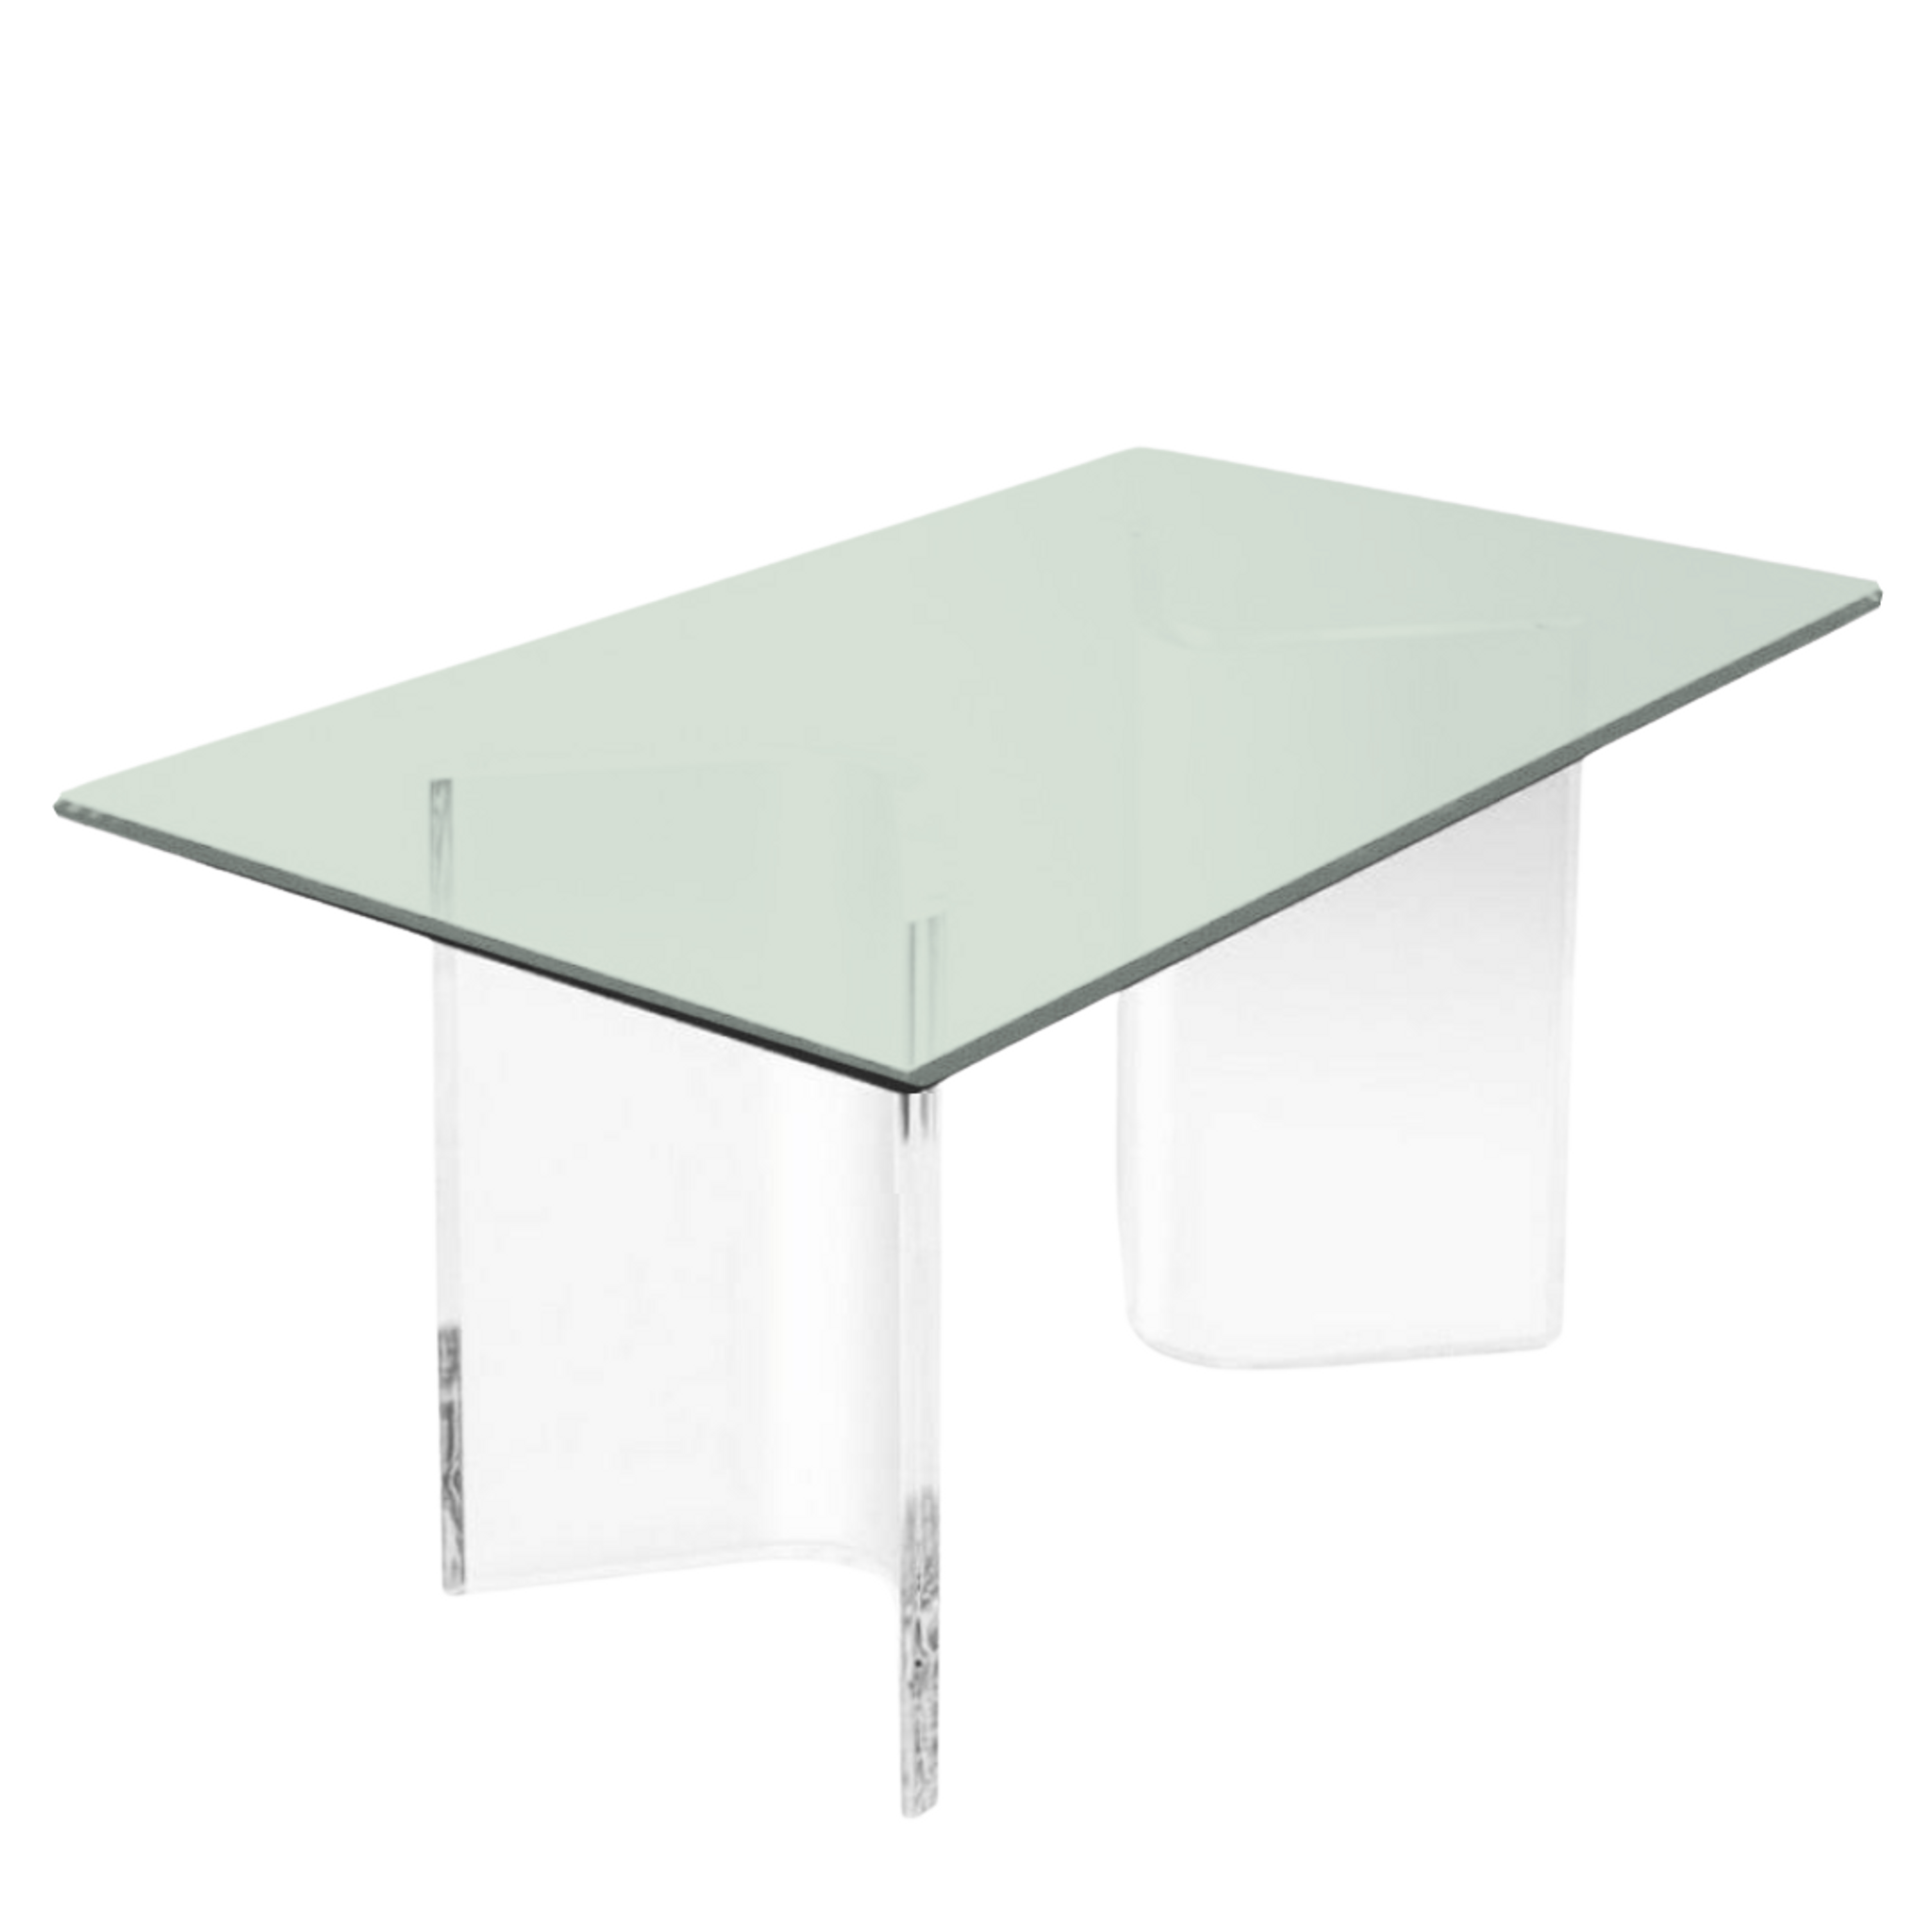 lucite clear acrylic boomerang base glass top desk